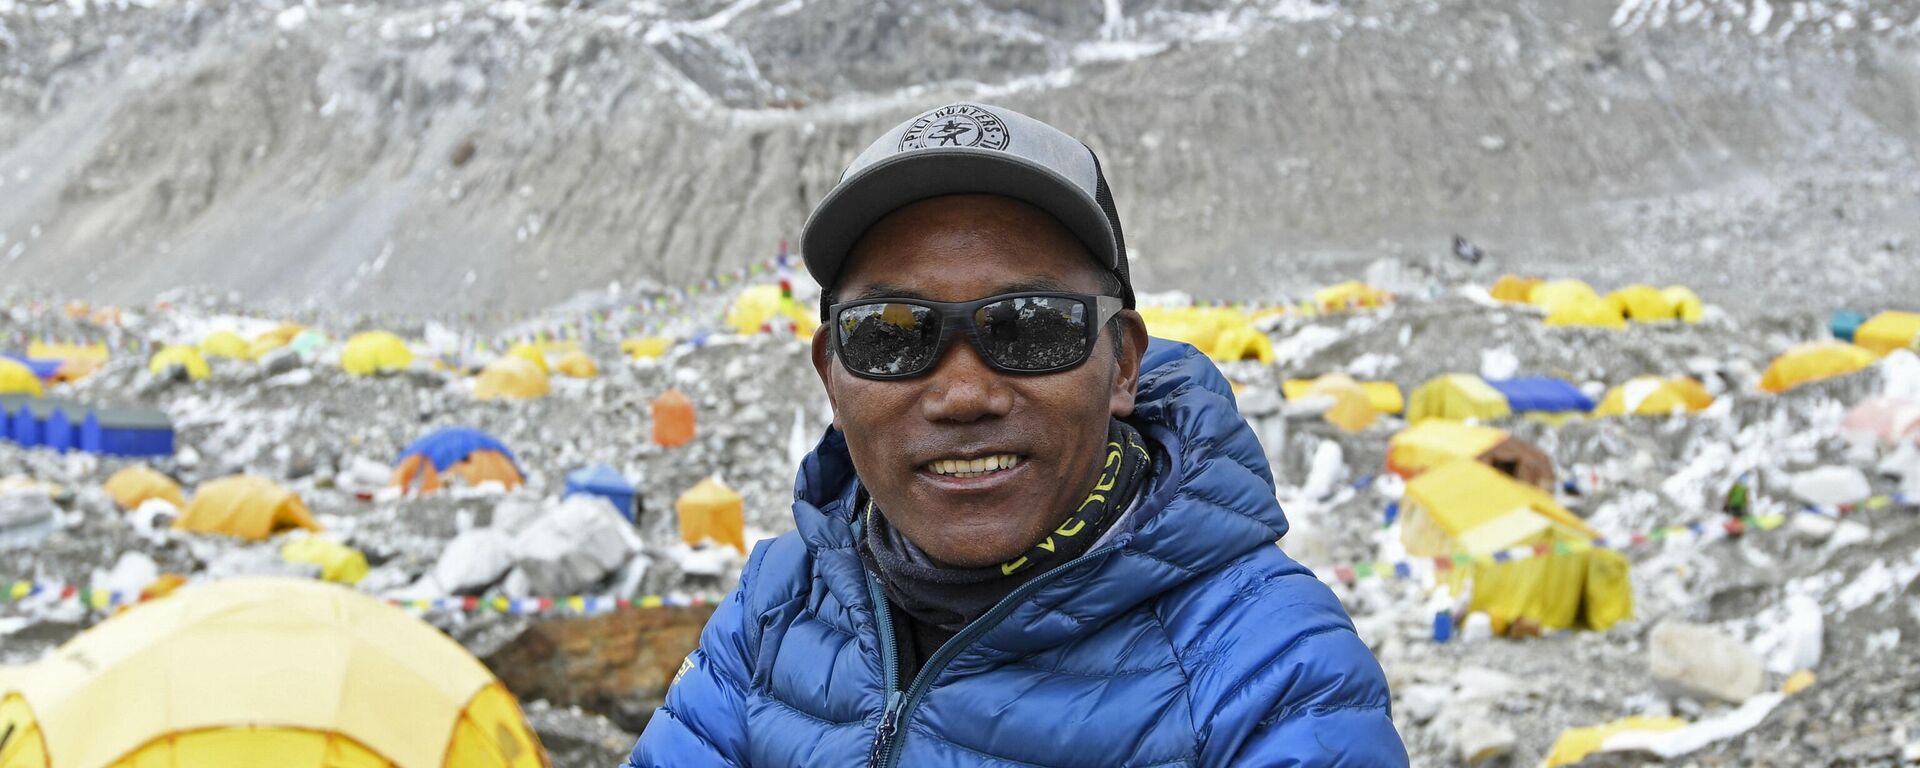 In this file photo taken on May 2, 2021, Nepal's mountaineer Kami Rita Sherpa poses for a picture during an interview with AFP at the Everest base camp in the Mount Everest region of Solukhumbu district. Kami Rita Sherpa reached the top of Mount Everest for the 27th time on May 17, reclaiming the record for the most summits of the world's highest mountain. - Sputnik India, 1920, 17.05.2023